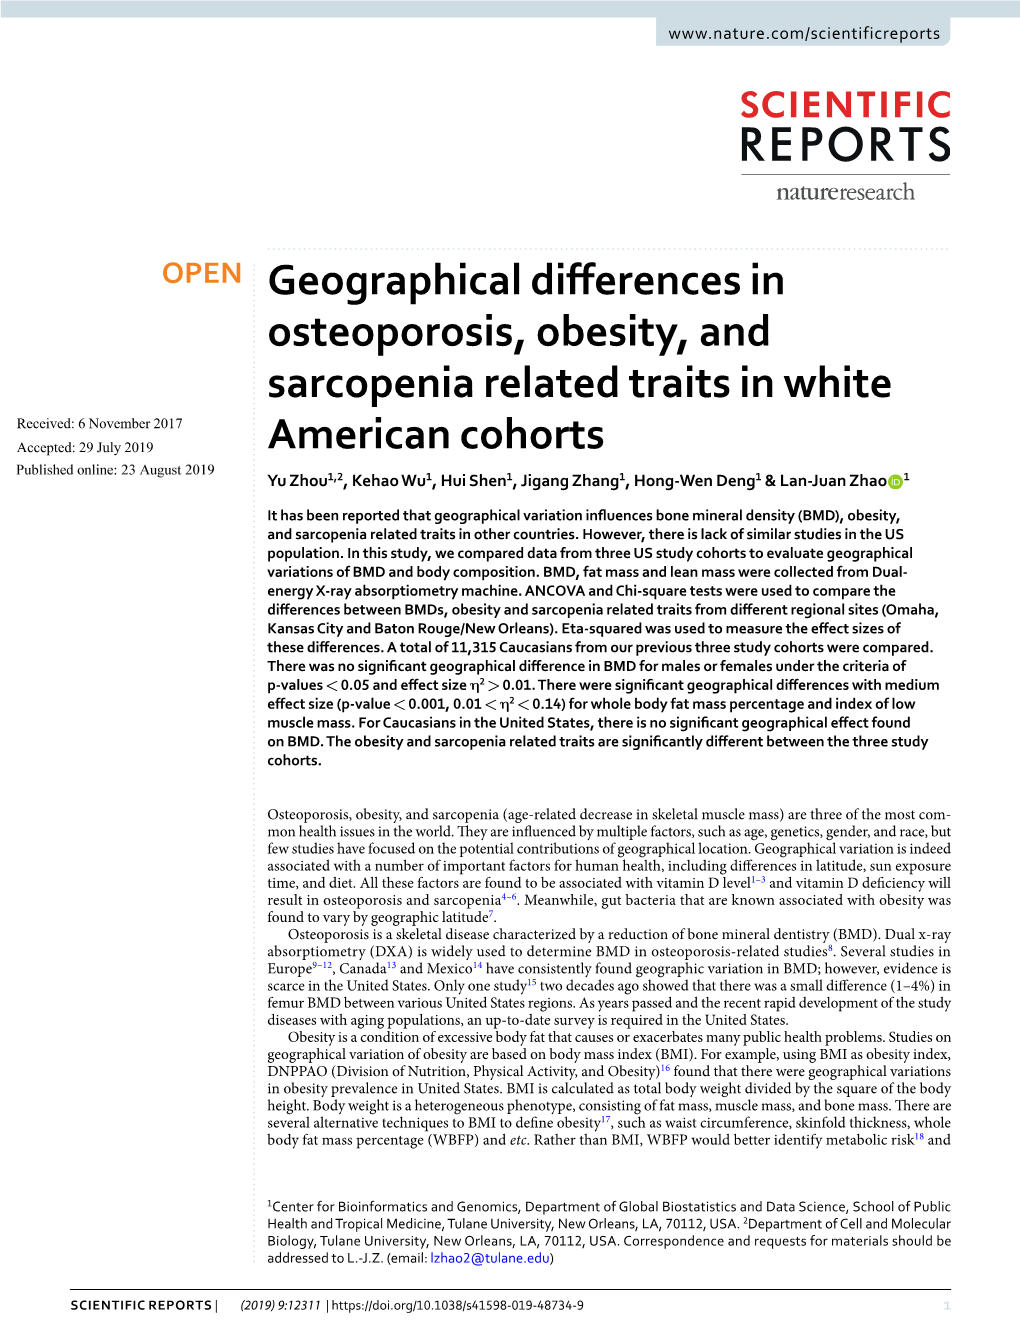 Geographical Differences in Osteoporosis, Obesity, And